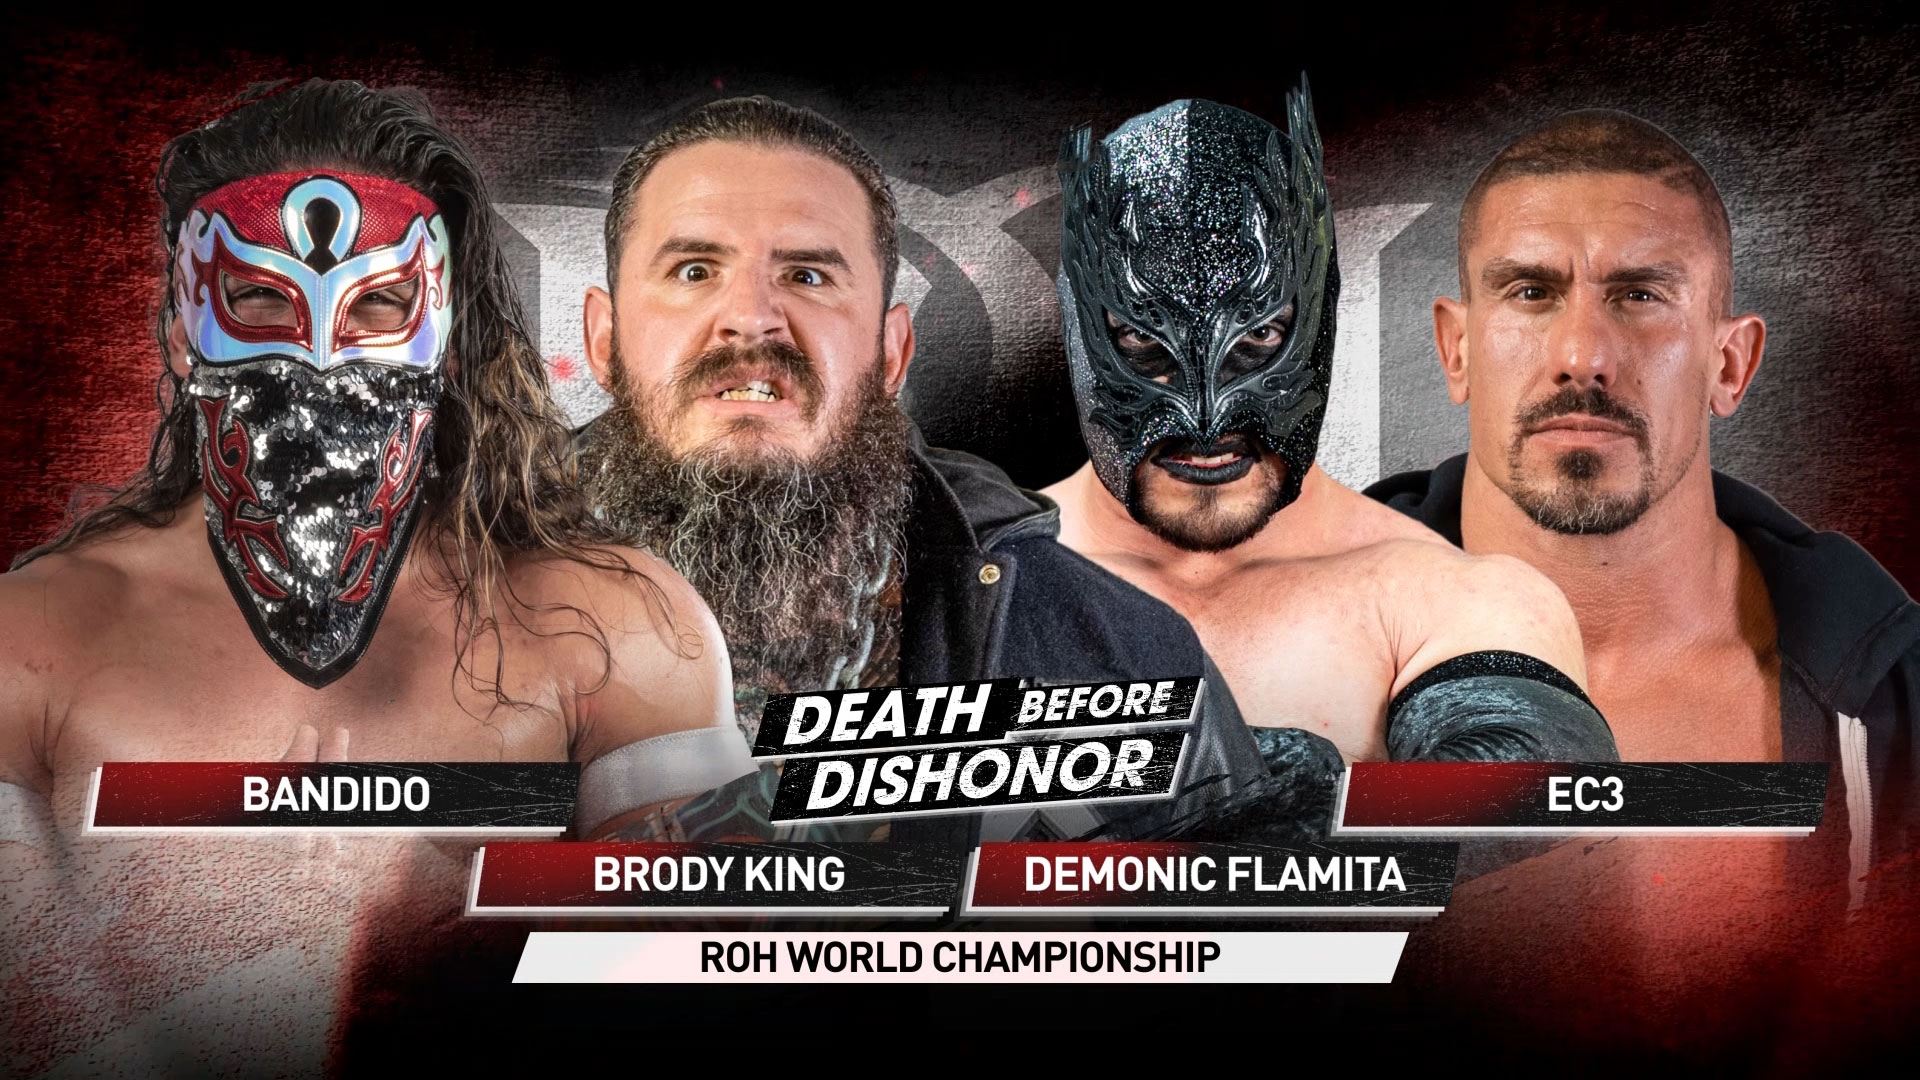 Bandido Announced For Four Way Elimination Match at ROH Death Before Dishonor 2021